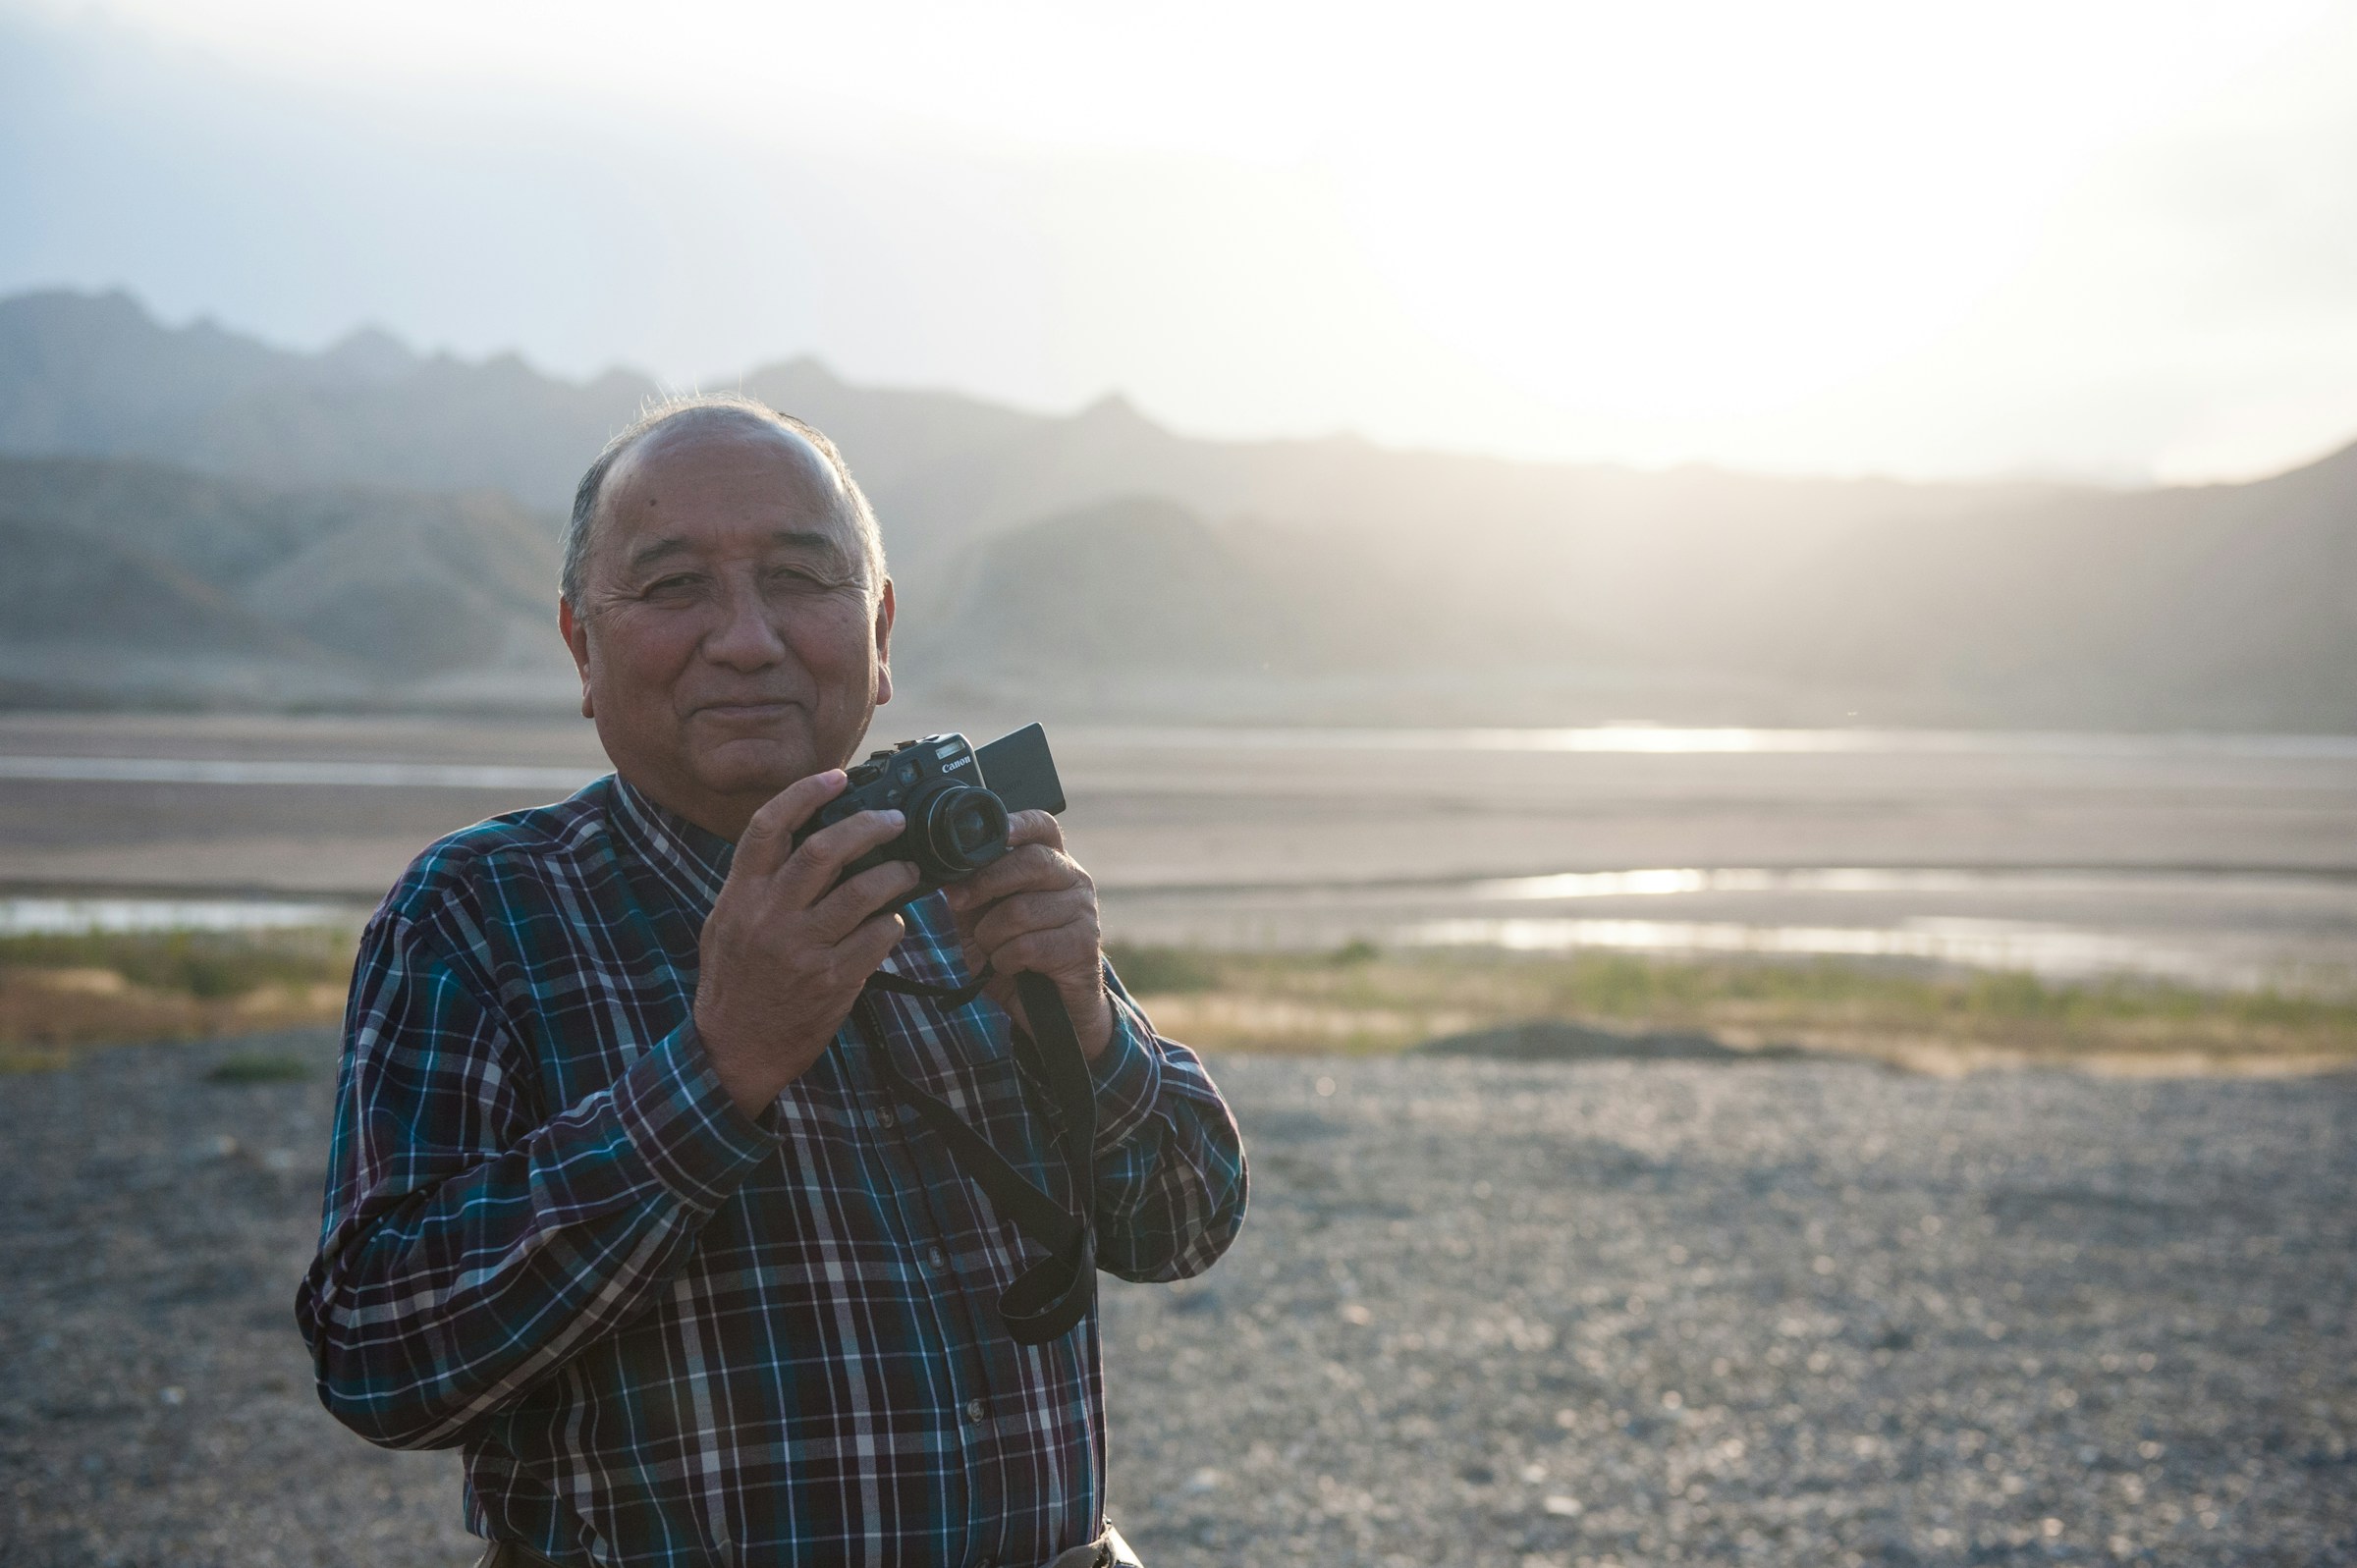 An elderly man stands on the shore of a lake during sunrise, holding a camera.